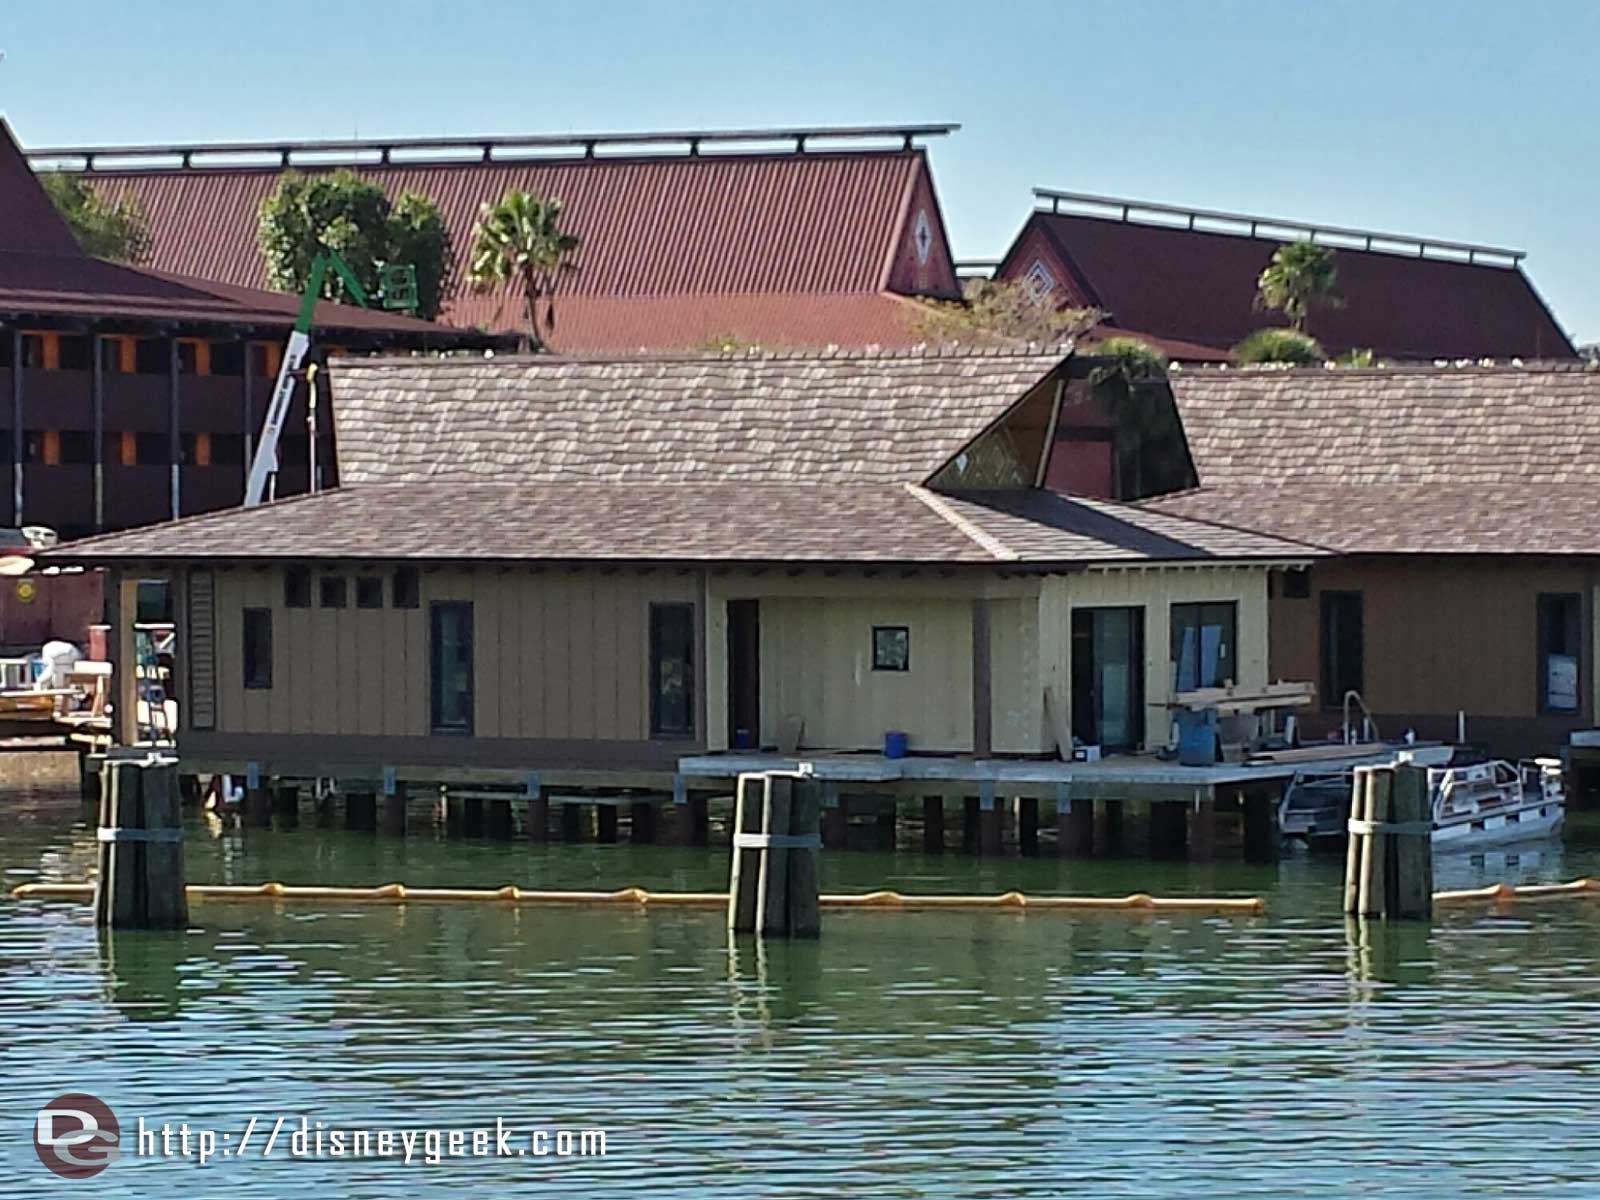 A Polynesian bungalow under construction, taken from the Magic Kingdom ferryboat.